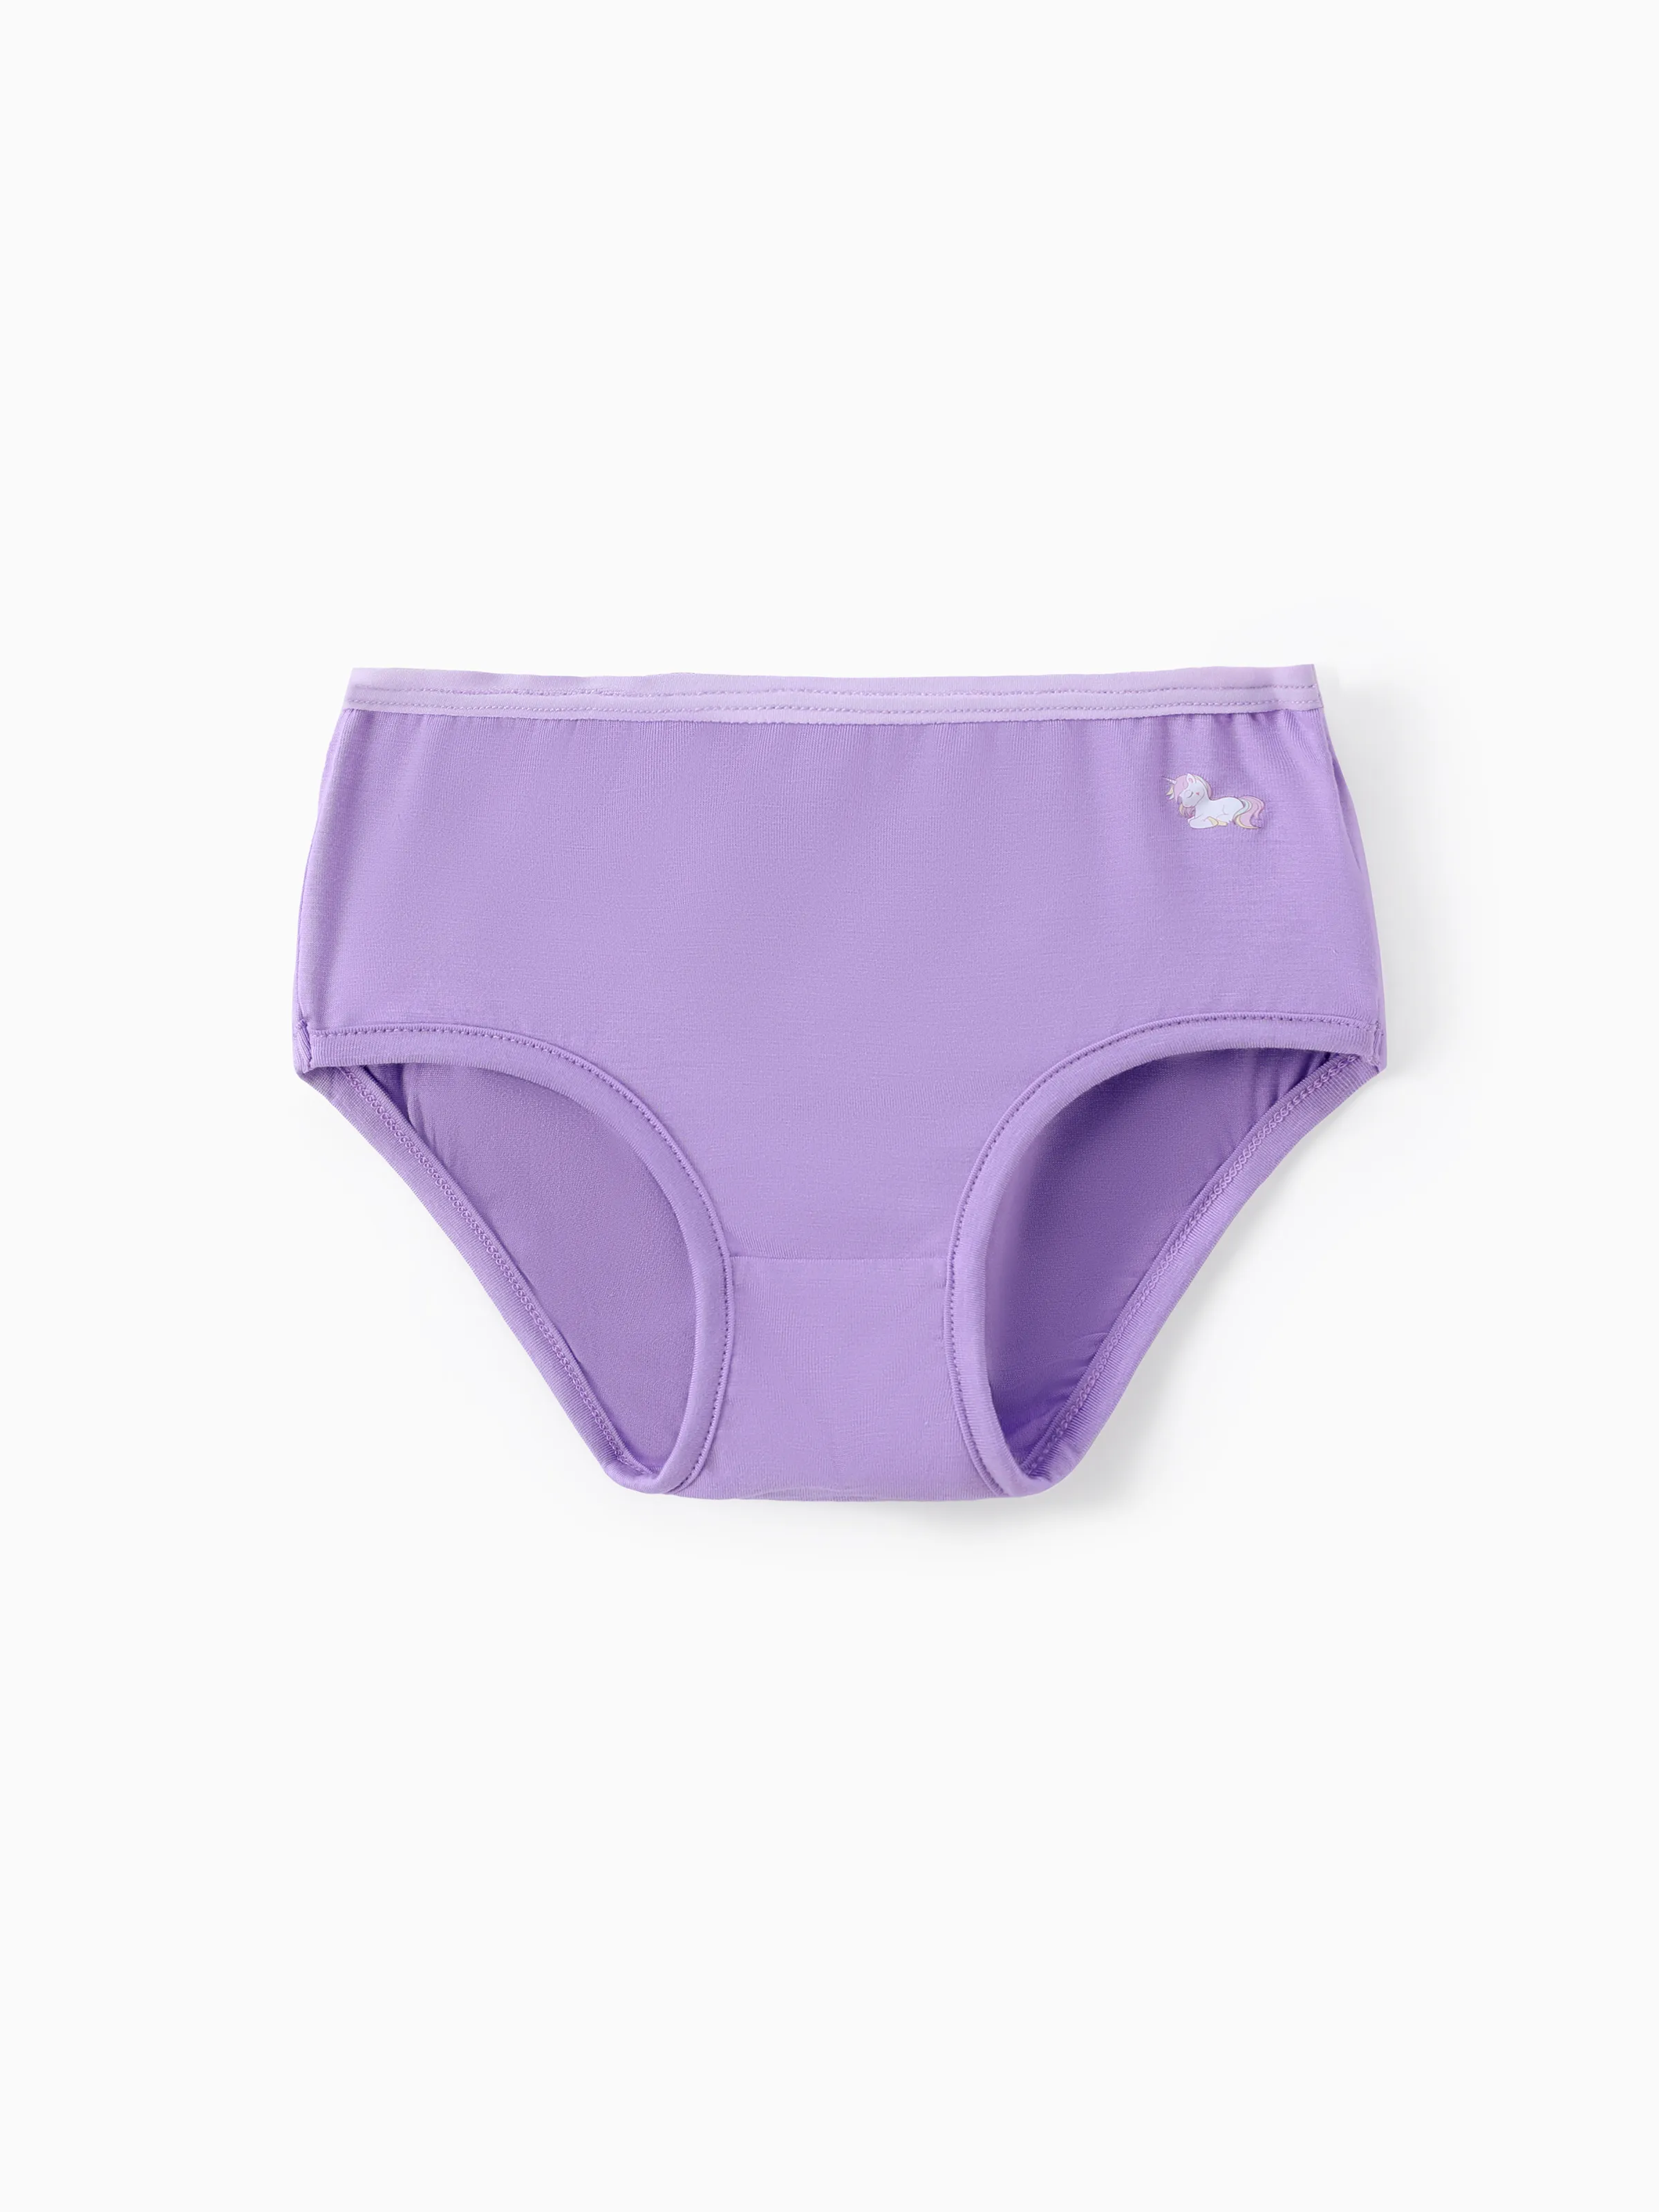 

Toddler Girl 1pcs Unicorn/Solid Color Underwear